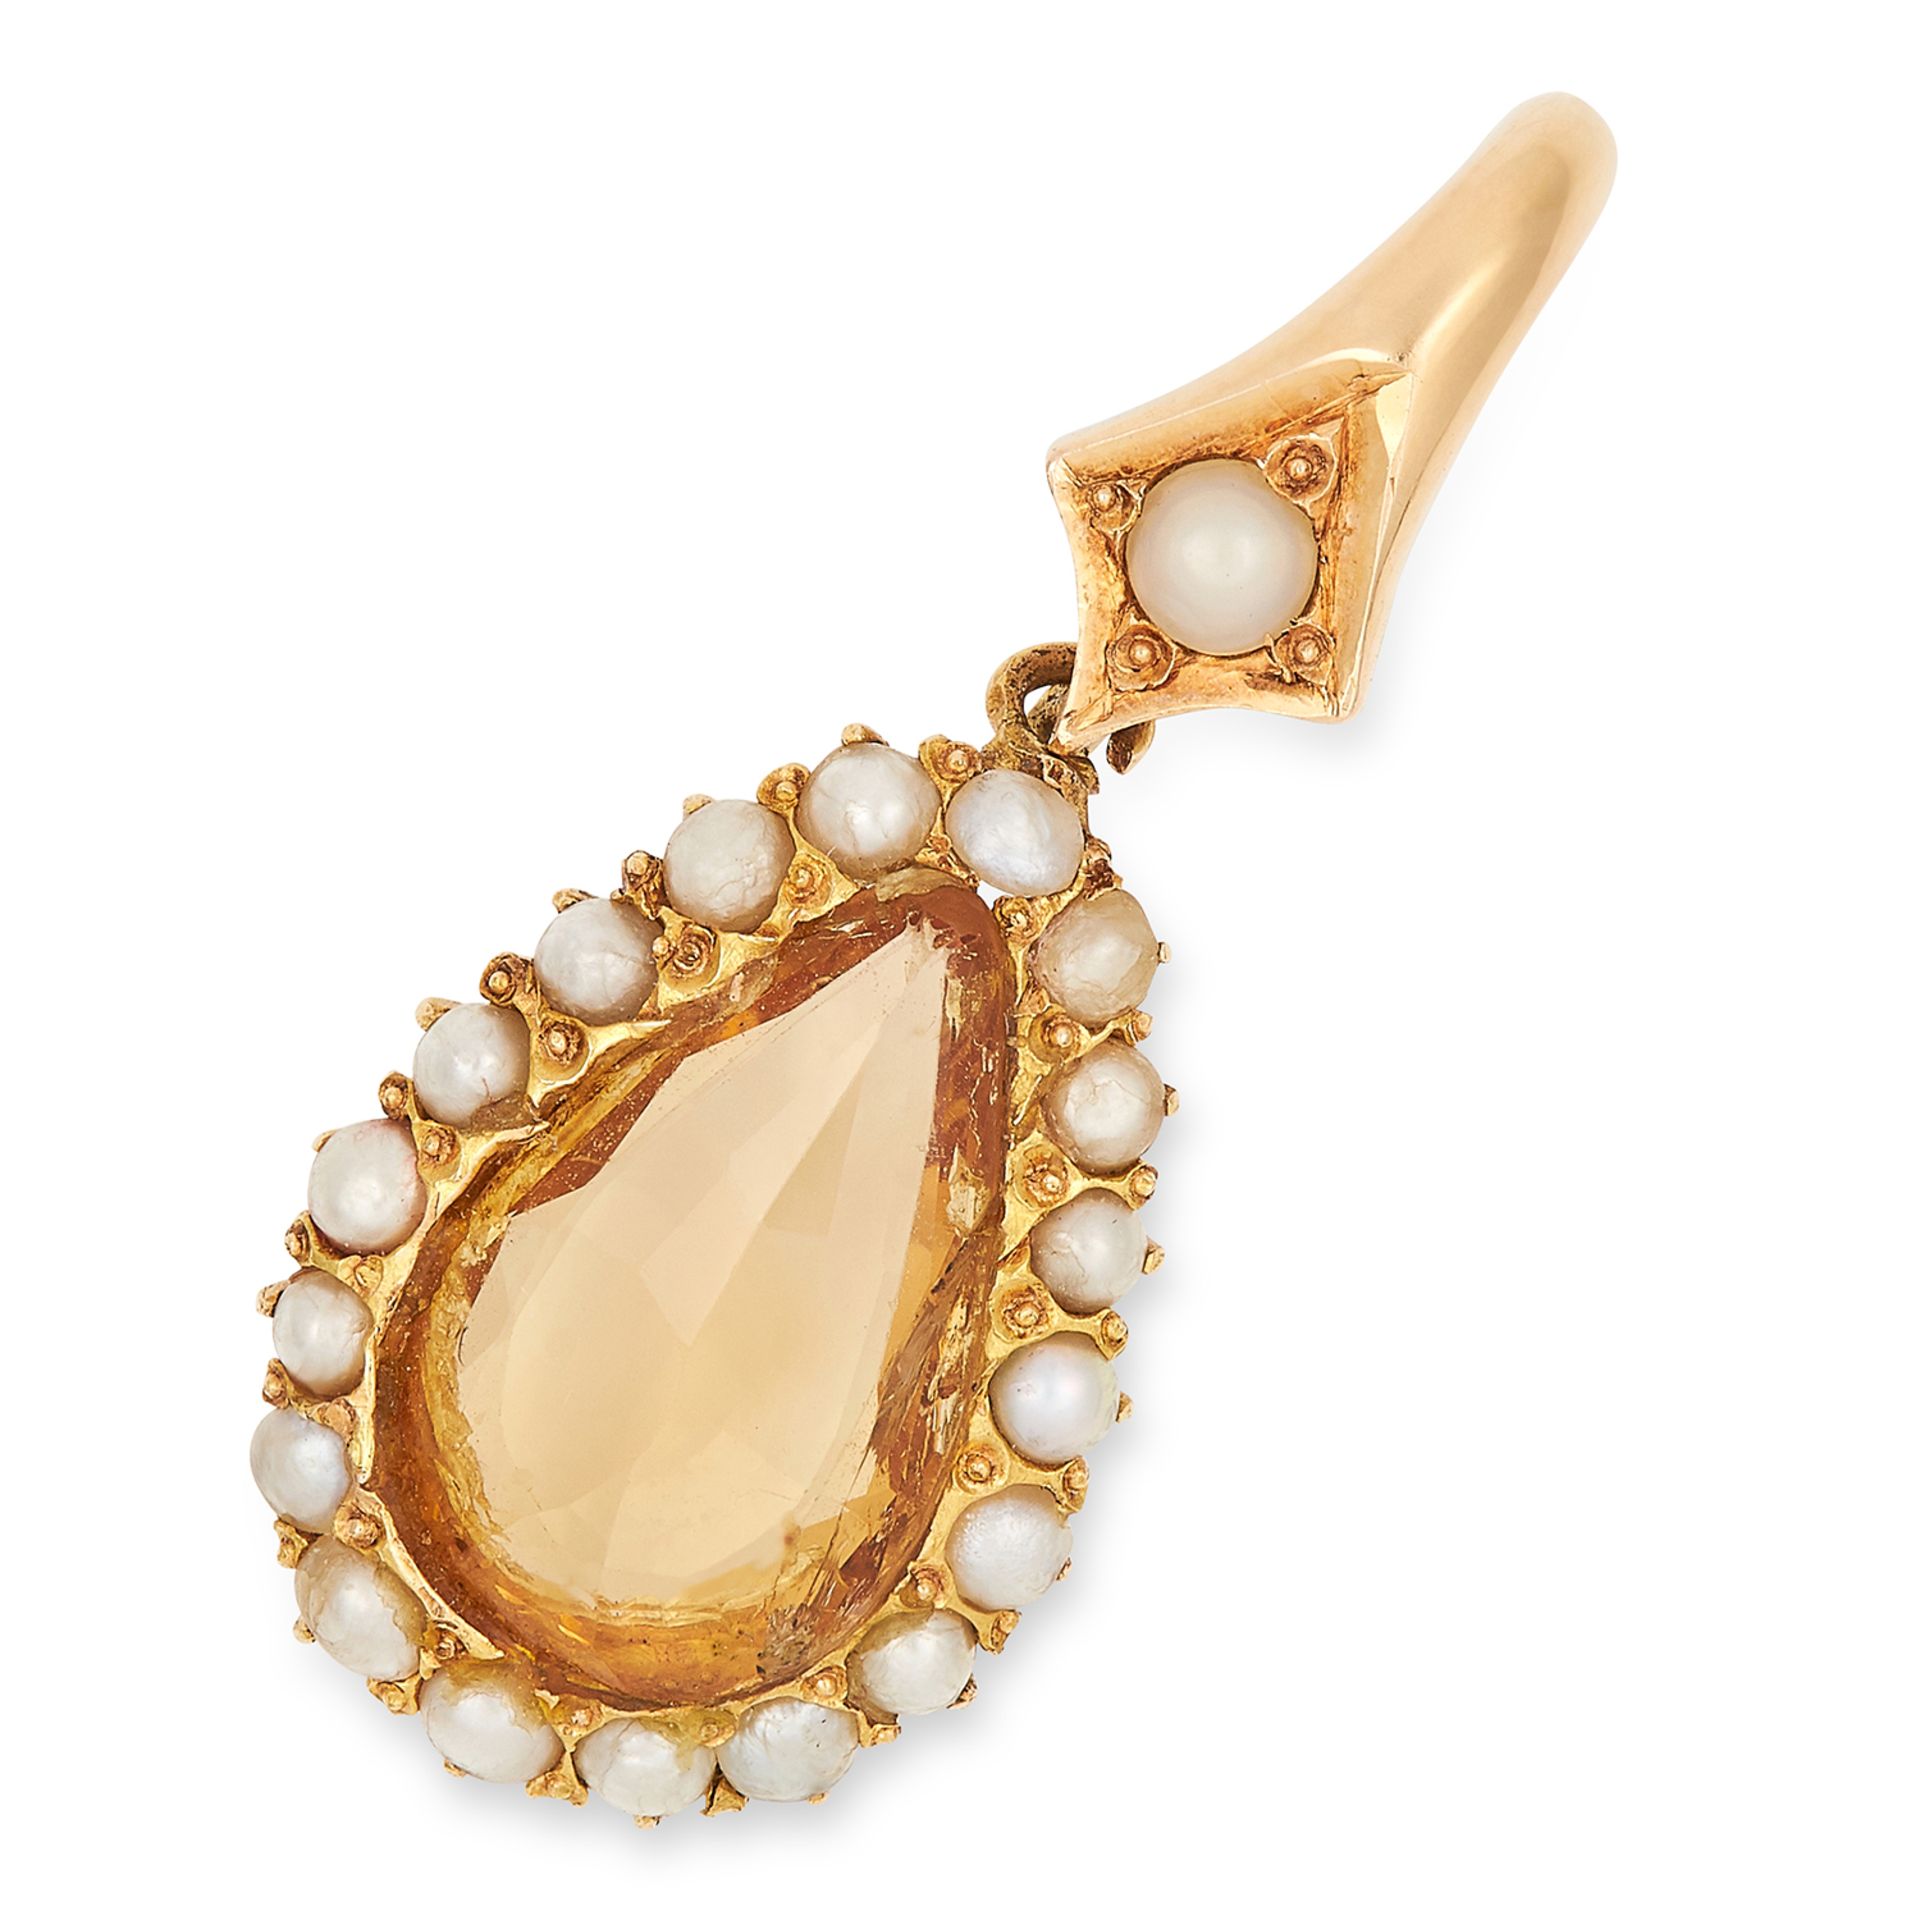 ANTIQUE IMPERIAL TOPAZ AND PEARL PENDANT, 19TH CENTURY set with a pear shaped, rose cut topaz and